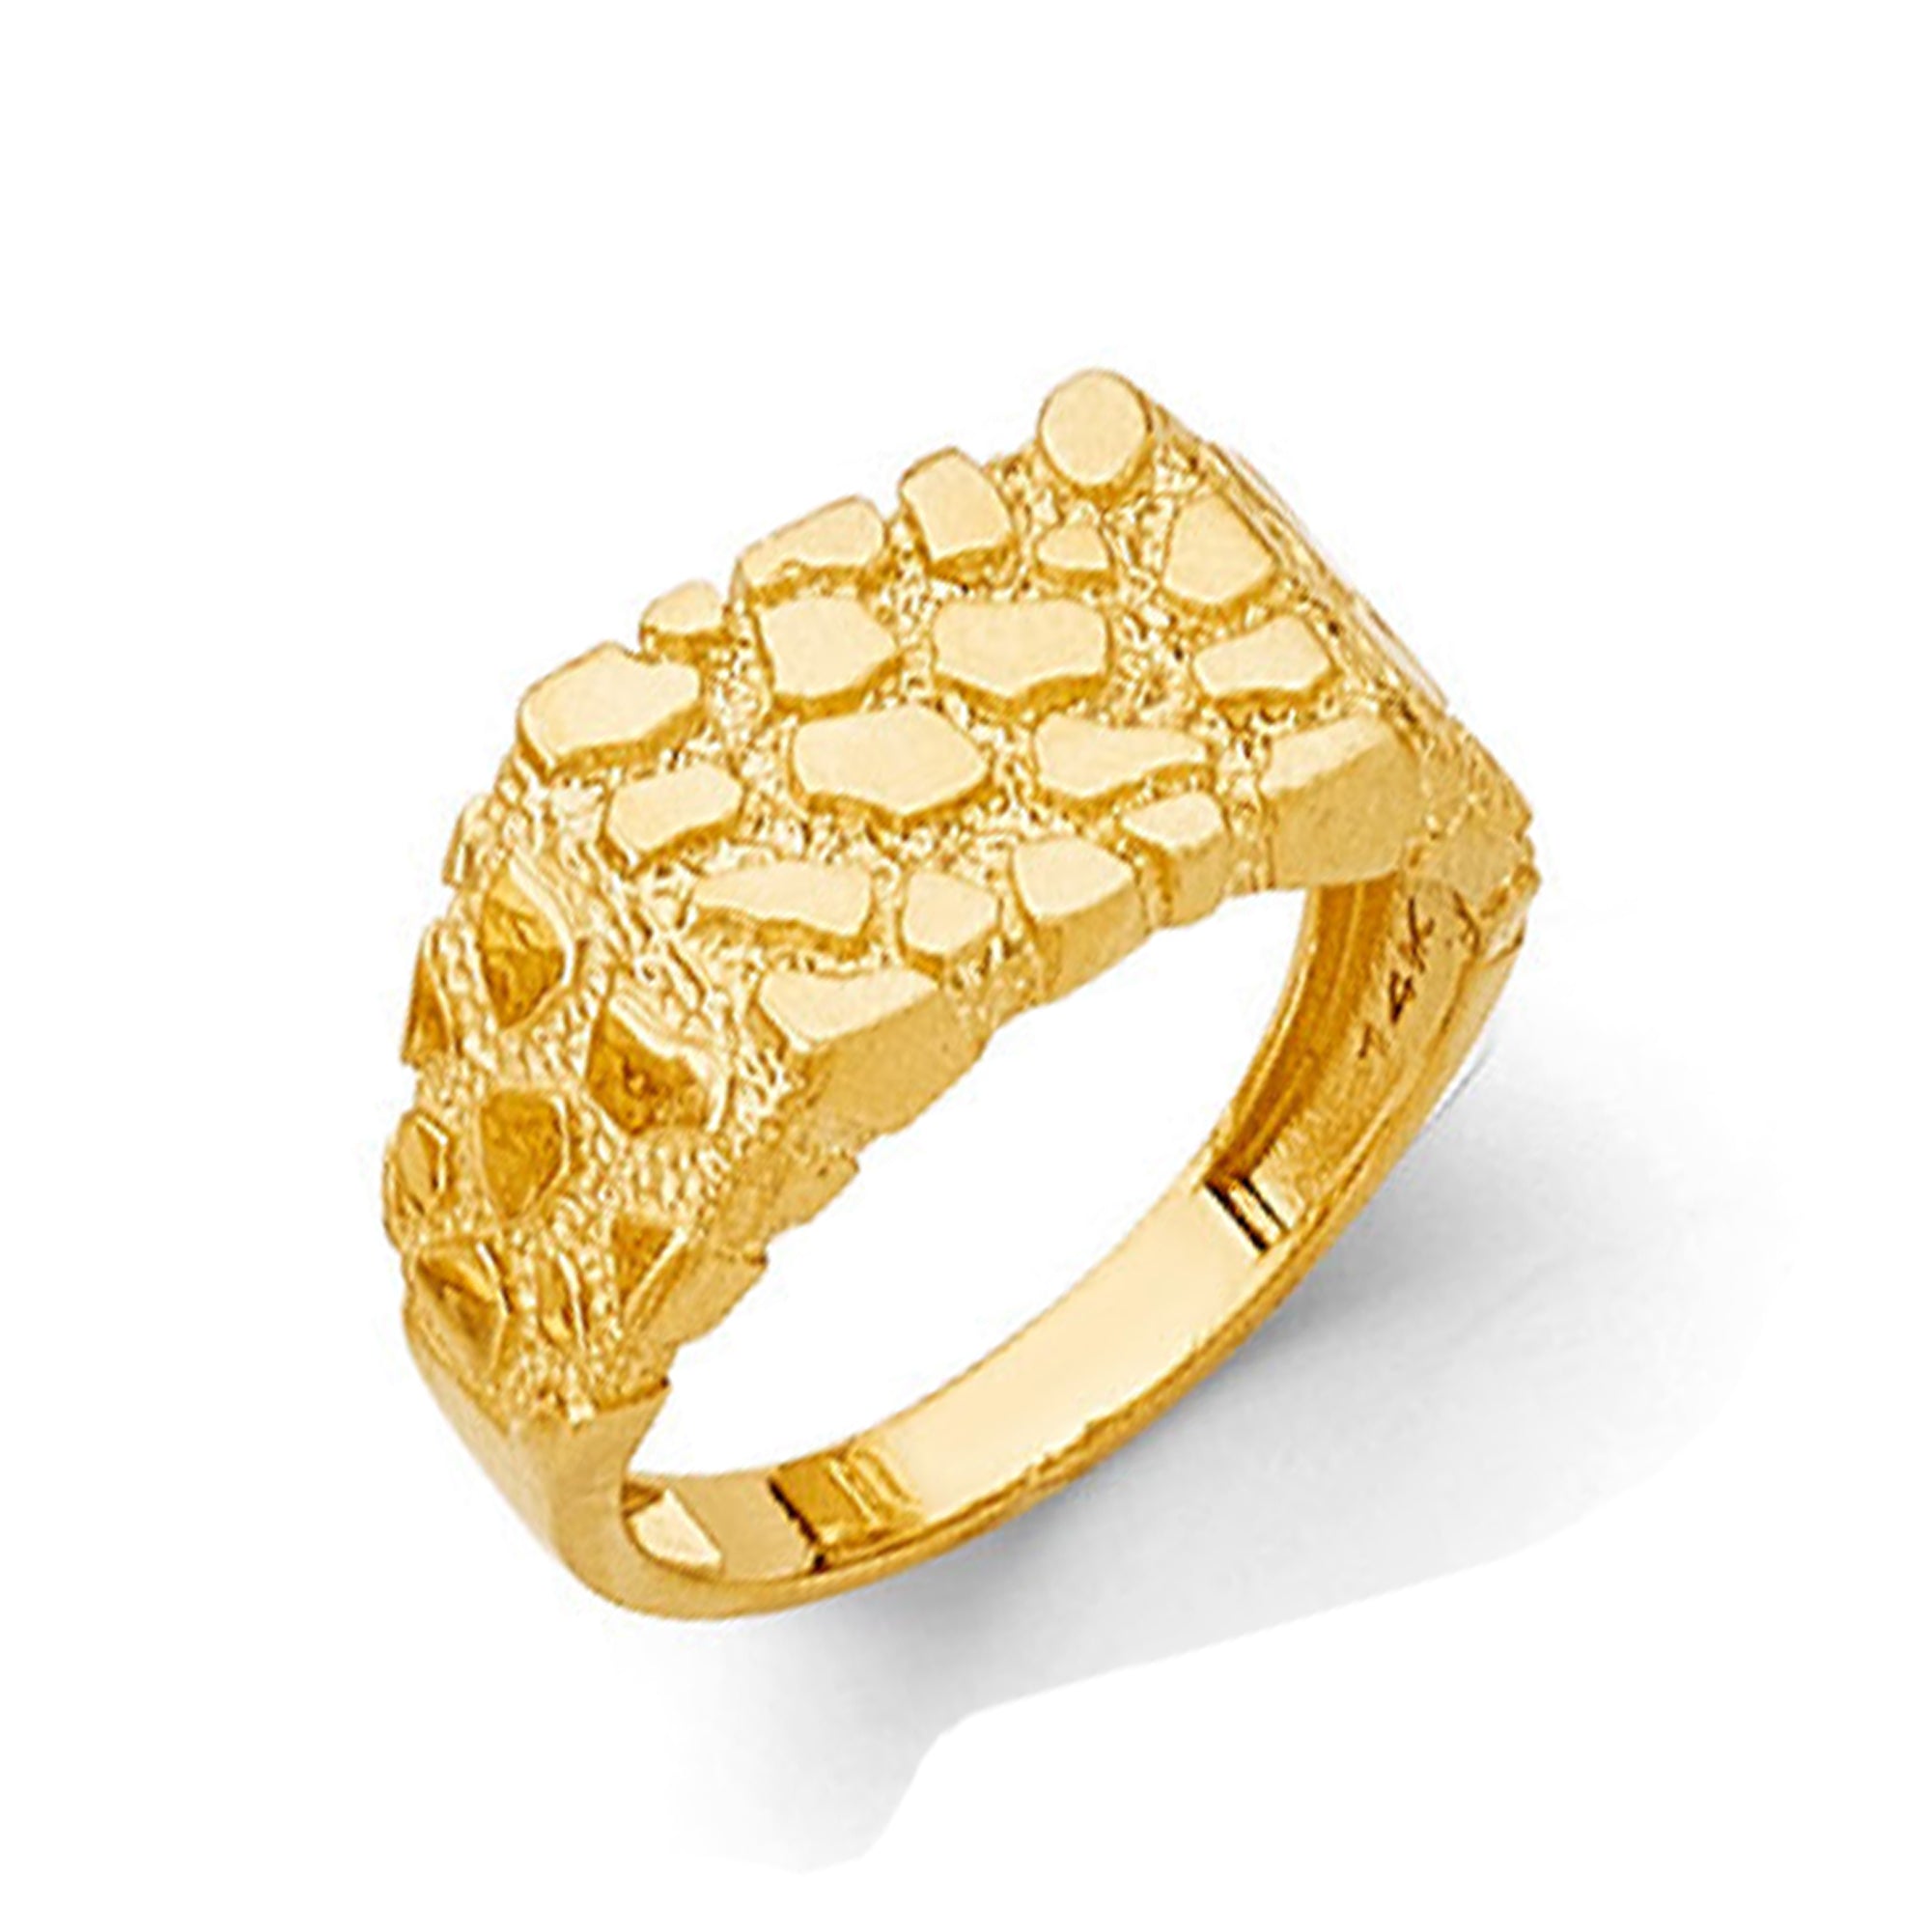 Sophisticated Square Nugget Ring in Solid Gold 